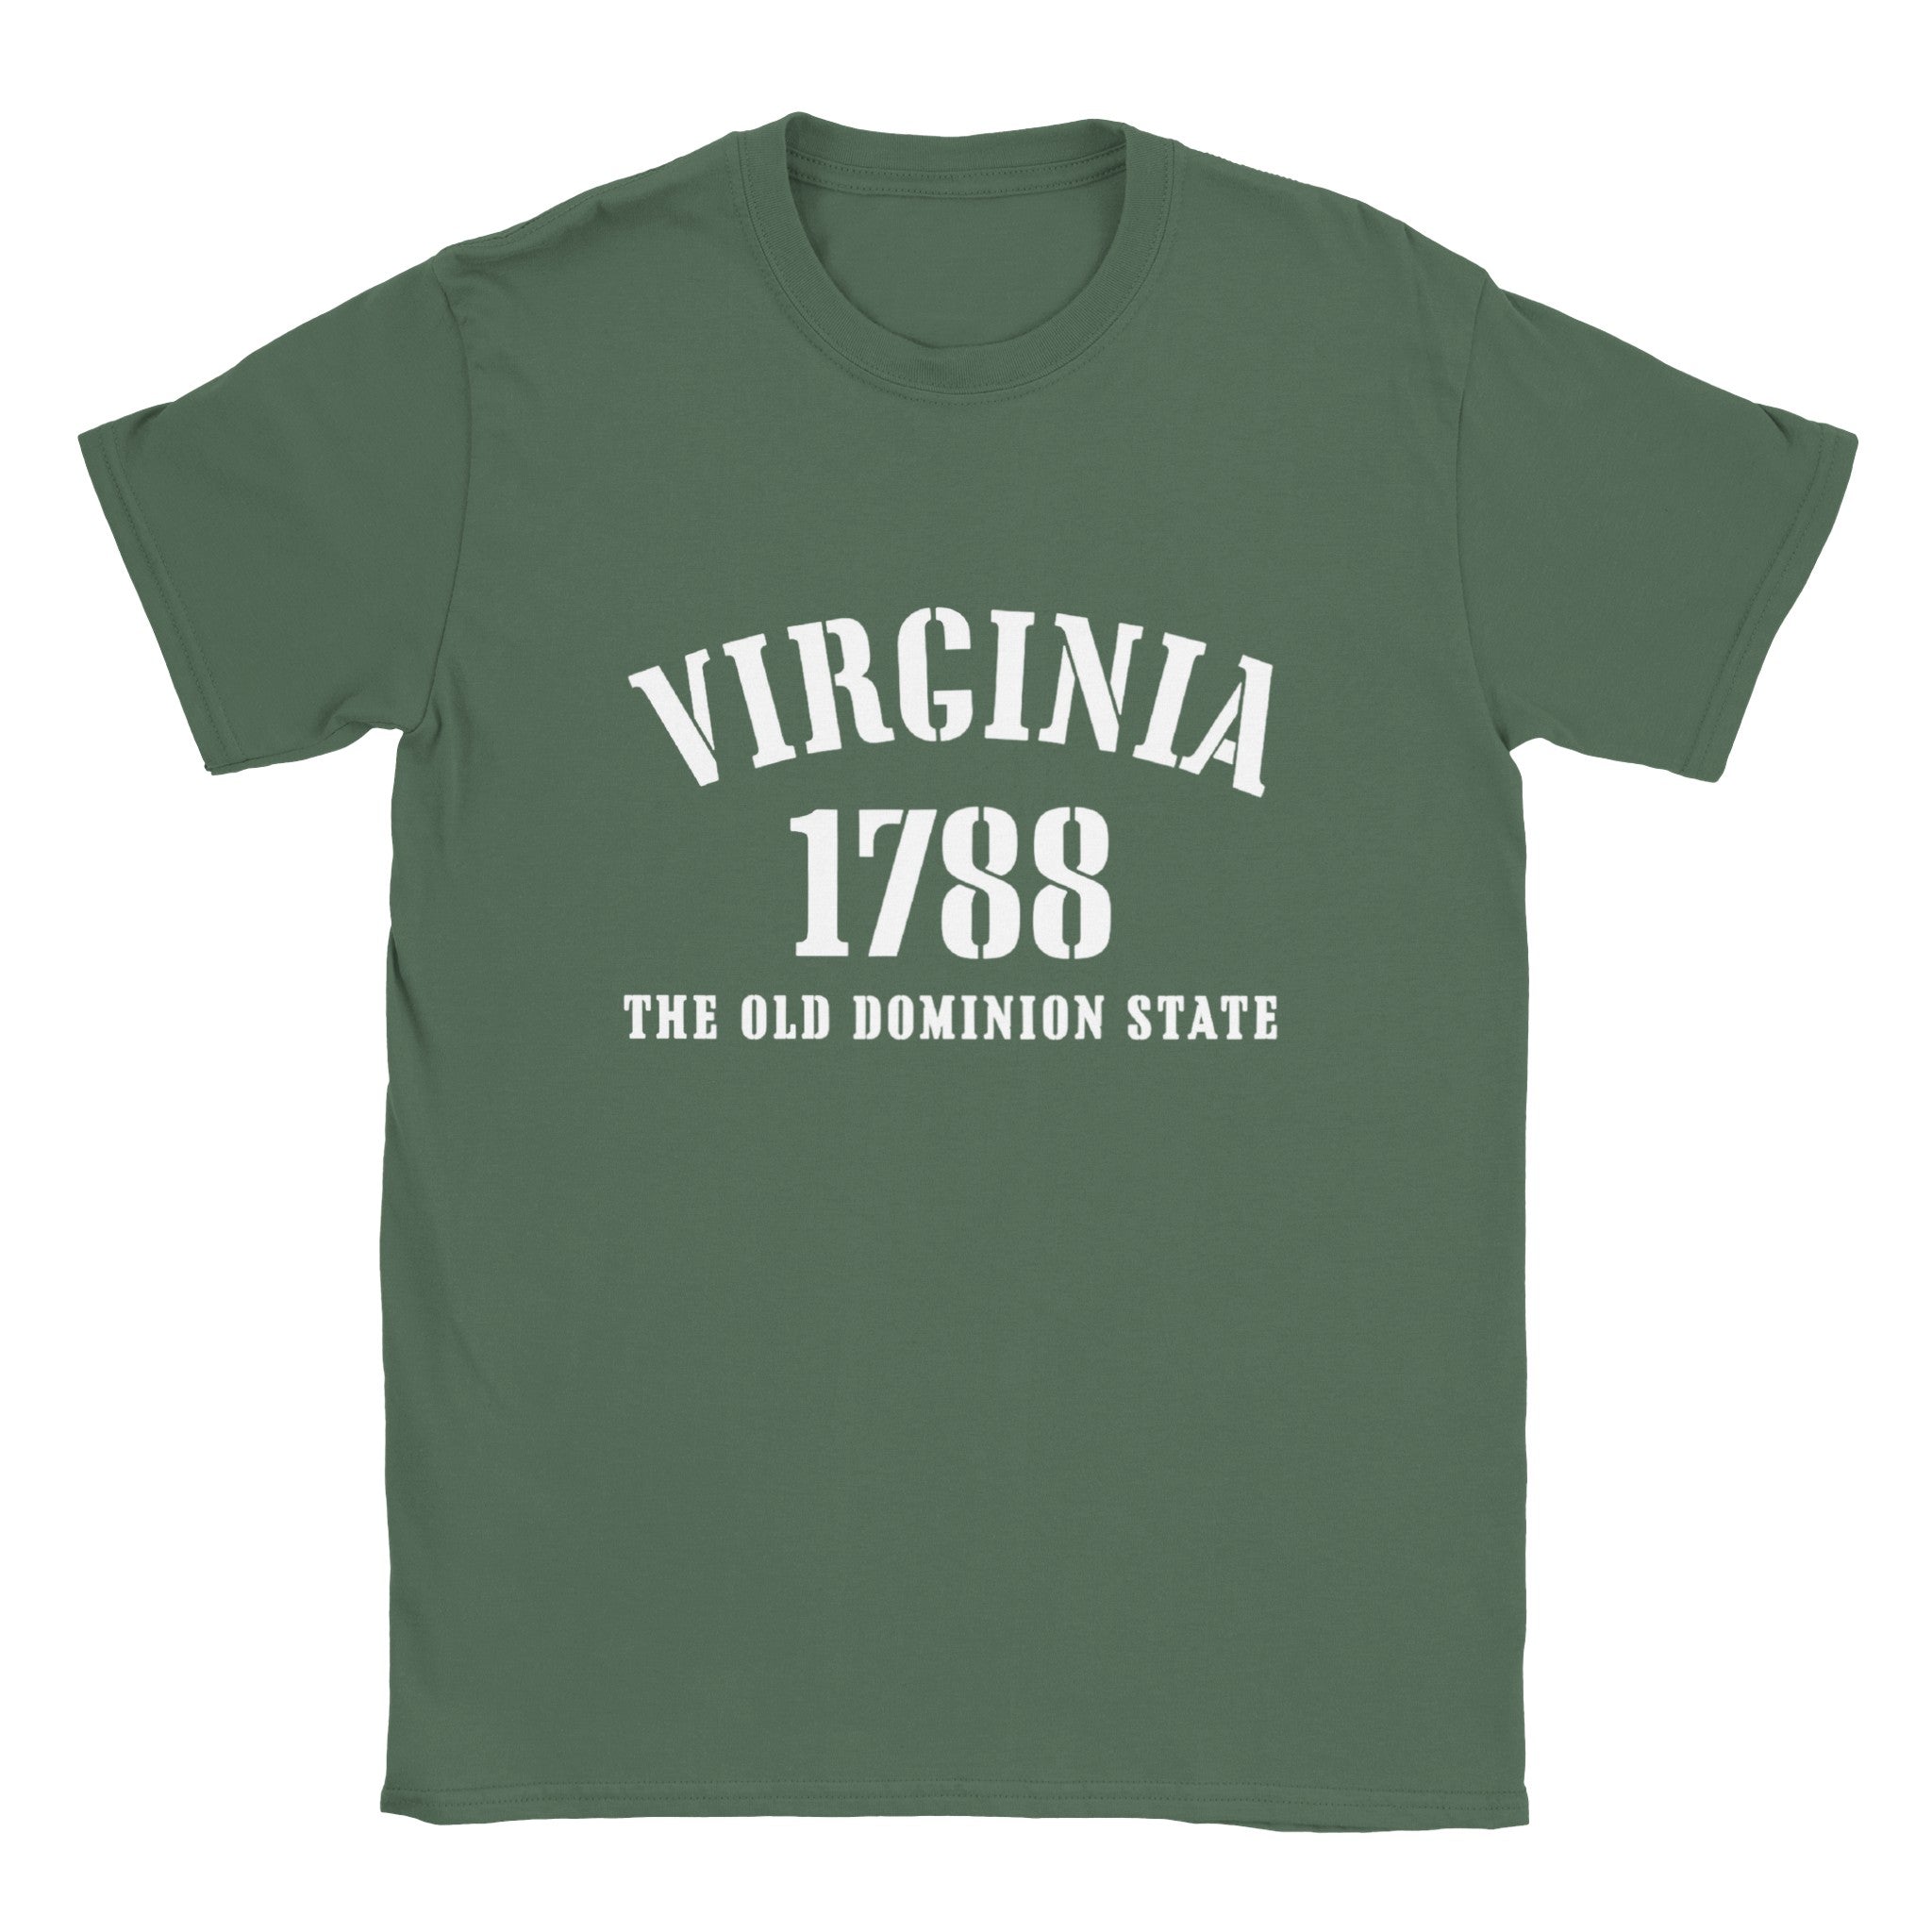 Virginia- Classic Unisex Crewneck States T-shirt - Creations by Chris and Carlos